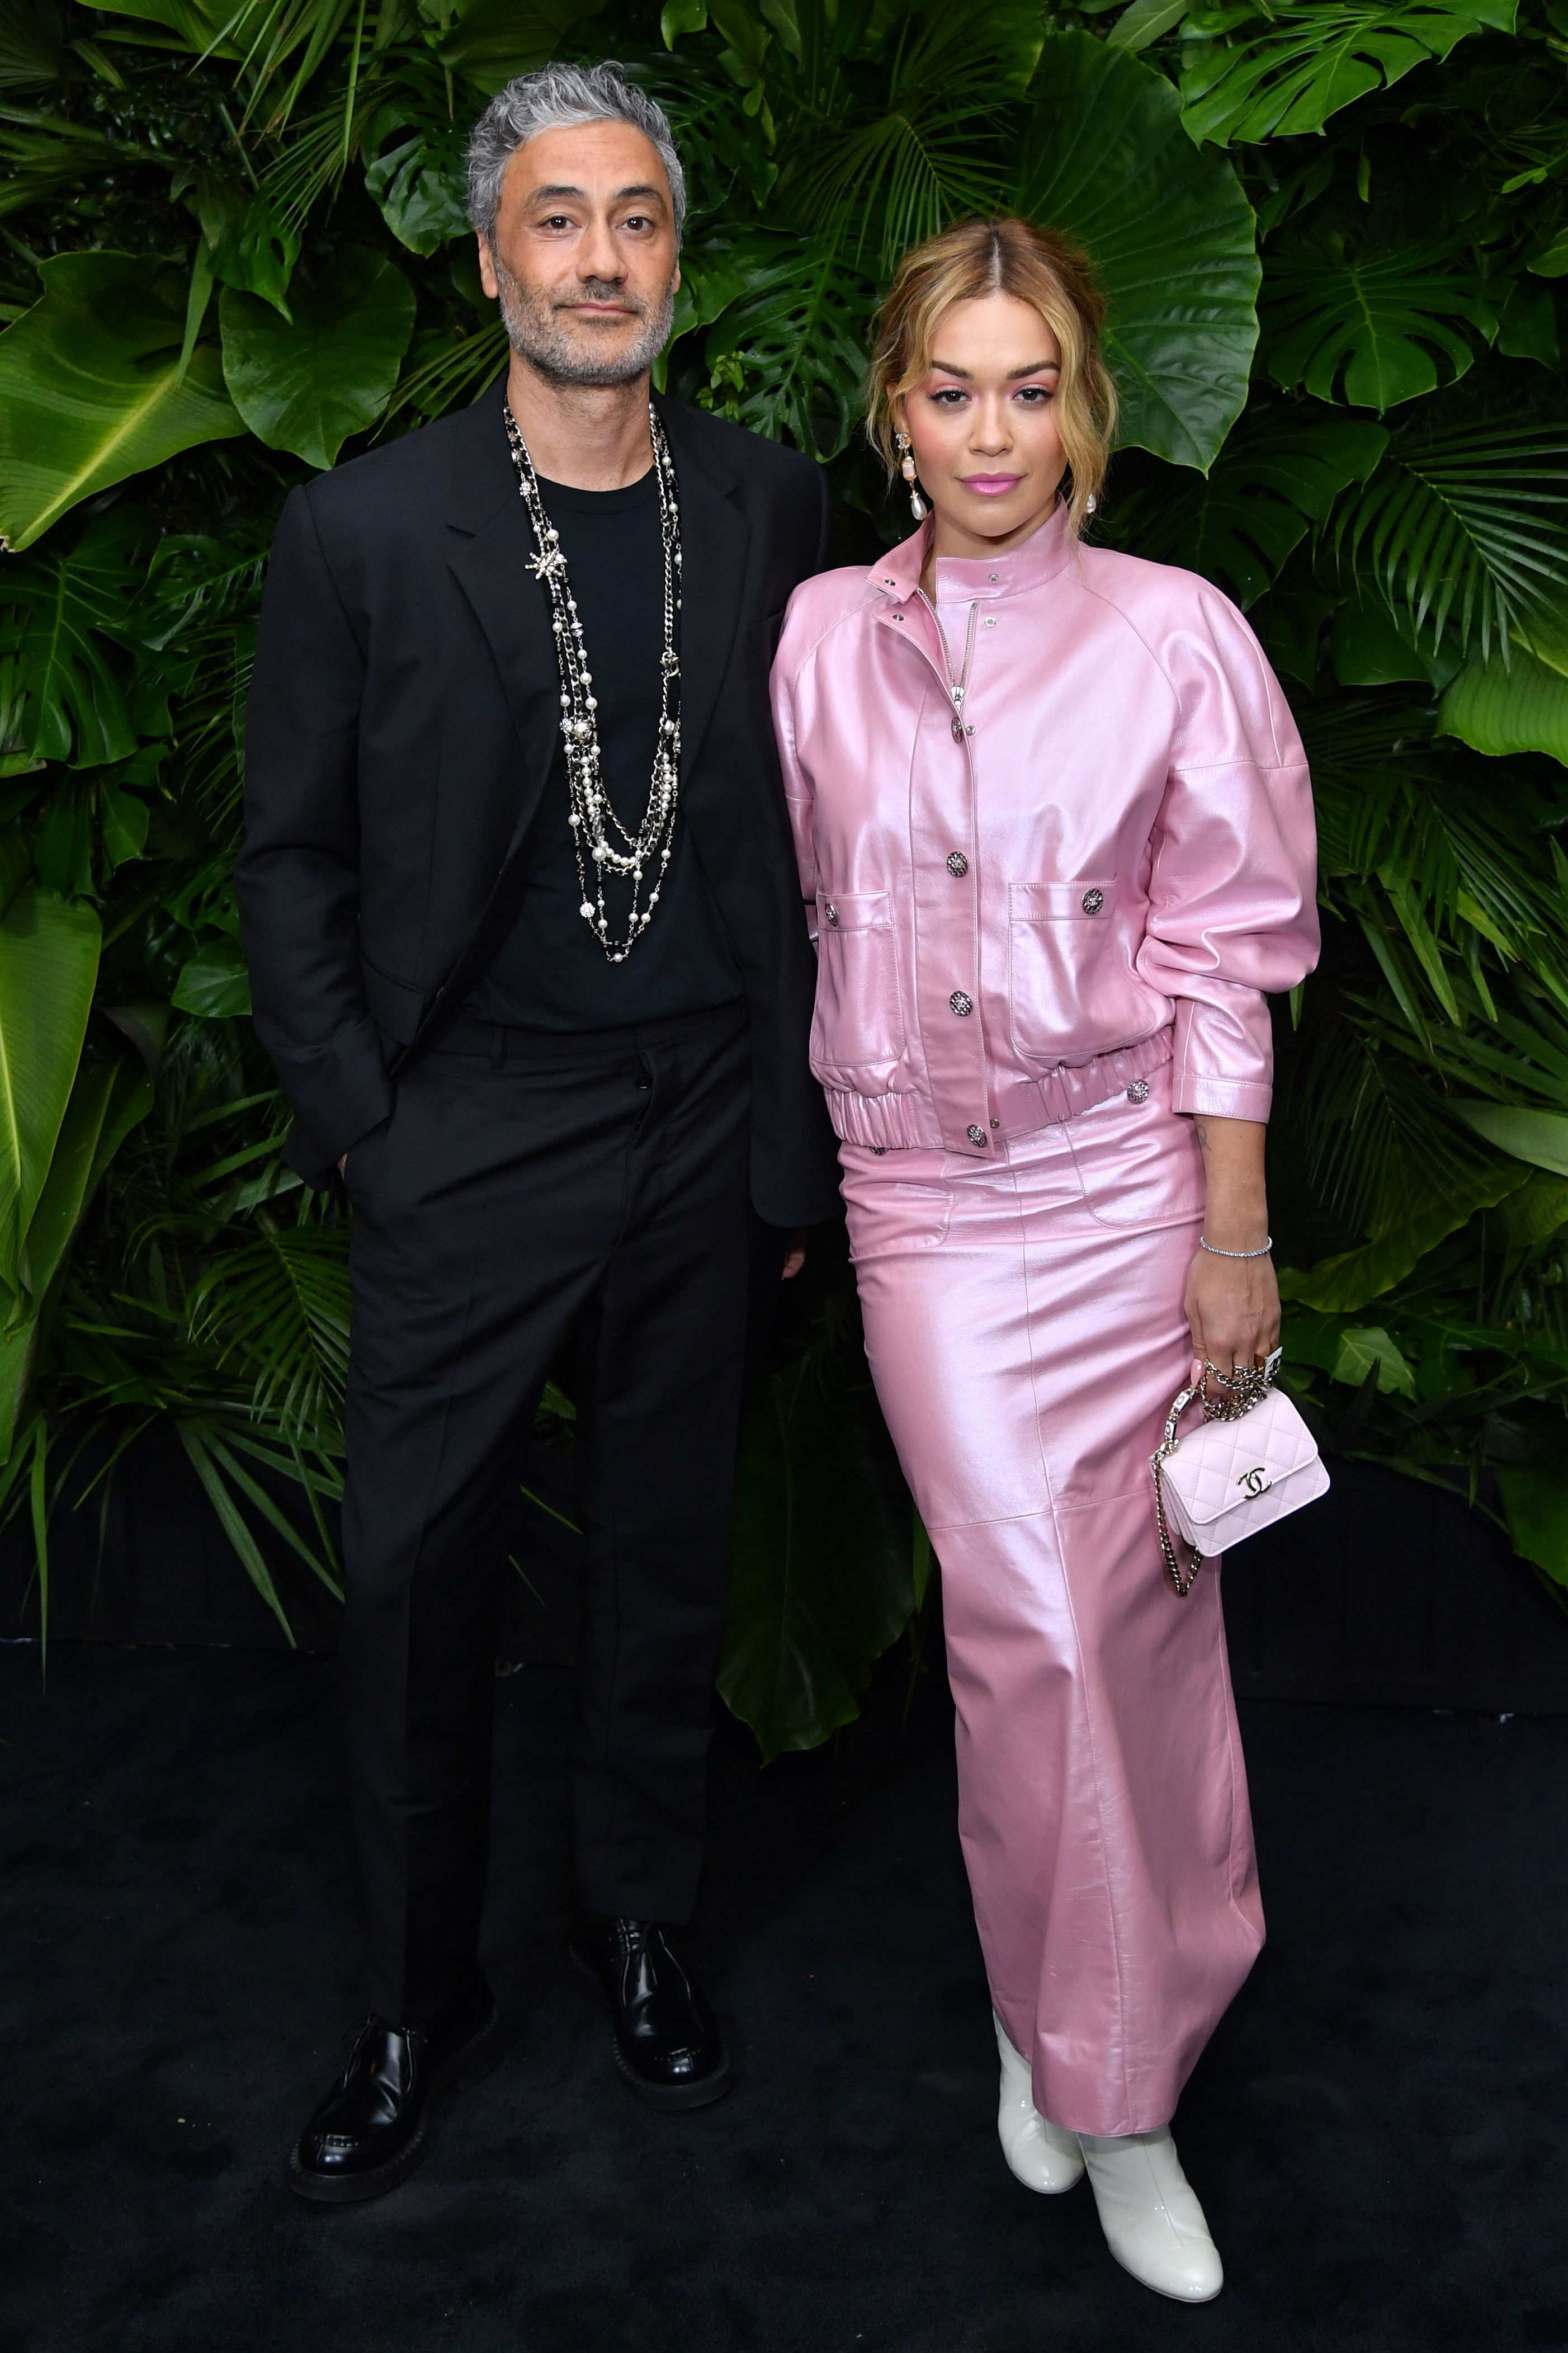 <p><span>Oscar winner Taika Waititi and his wife since 2022, pop singer <a href="https://www.wonderwall.com/celebrity/profiles/overview/rita-ora-1522.article">Rita Ora</a>, have a "Twilight" star to thank for introducing them. "We've actually known each other for years, before we got together [romantically in 2021]," the Marvel filmmaker, writer and actor said on the BBC Two series "Louis Theroux Interviews" in November 2022. "Everyone thinks we met in Australia last year" — after they were photographed looking cozy. But the truth is that they met years earlier. "You know who brought her to my house? Rob Pattinson. He brought her over," Taika explained, as reported by </span><a href="https://www.dailymail.co.uk/tvshowbiz/article-11485895/Rita-Oras-husband-Taika-Waititi-reveals-Robert-Pattinson-played-matchmaker.html">DailyMail.com</a><span>. "I was having a little BBQ and we just got chatting, we hit it off, became friends. Then for the next three and a half years we were just good mates." The "Thor: Ragnarok" and "Jojo Rabbit" writer-director added, "We were in different relationships, and every time we hung out, we would just catch up where we left off, and it was a good friendship, and we decided to ruin it all." </span></p><p>Taika said he likes "the fact that we work hard, and we've both got our own jobs and [are] independent, but are also best friends." He acknowledged that though they're from "different parts of the world — she's from Kosovo and I'm from New Zealand," they have similar backgrounds. "We both grew up poor in working-class families, her dad owned pubs and she hung out in pubs a lot when she was a kid and my mum worked in pubs and a lot of my family enjoy being in pubs so I was in pubs a lot as a kid," he shared, adding, "The background of the Maori communities are quite similar to the Kosovan communities, like our sensibilities are quite aligned, I think."</p>